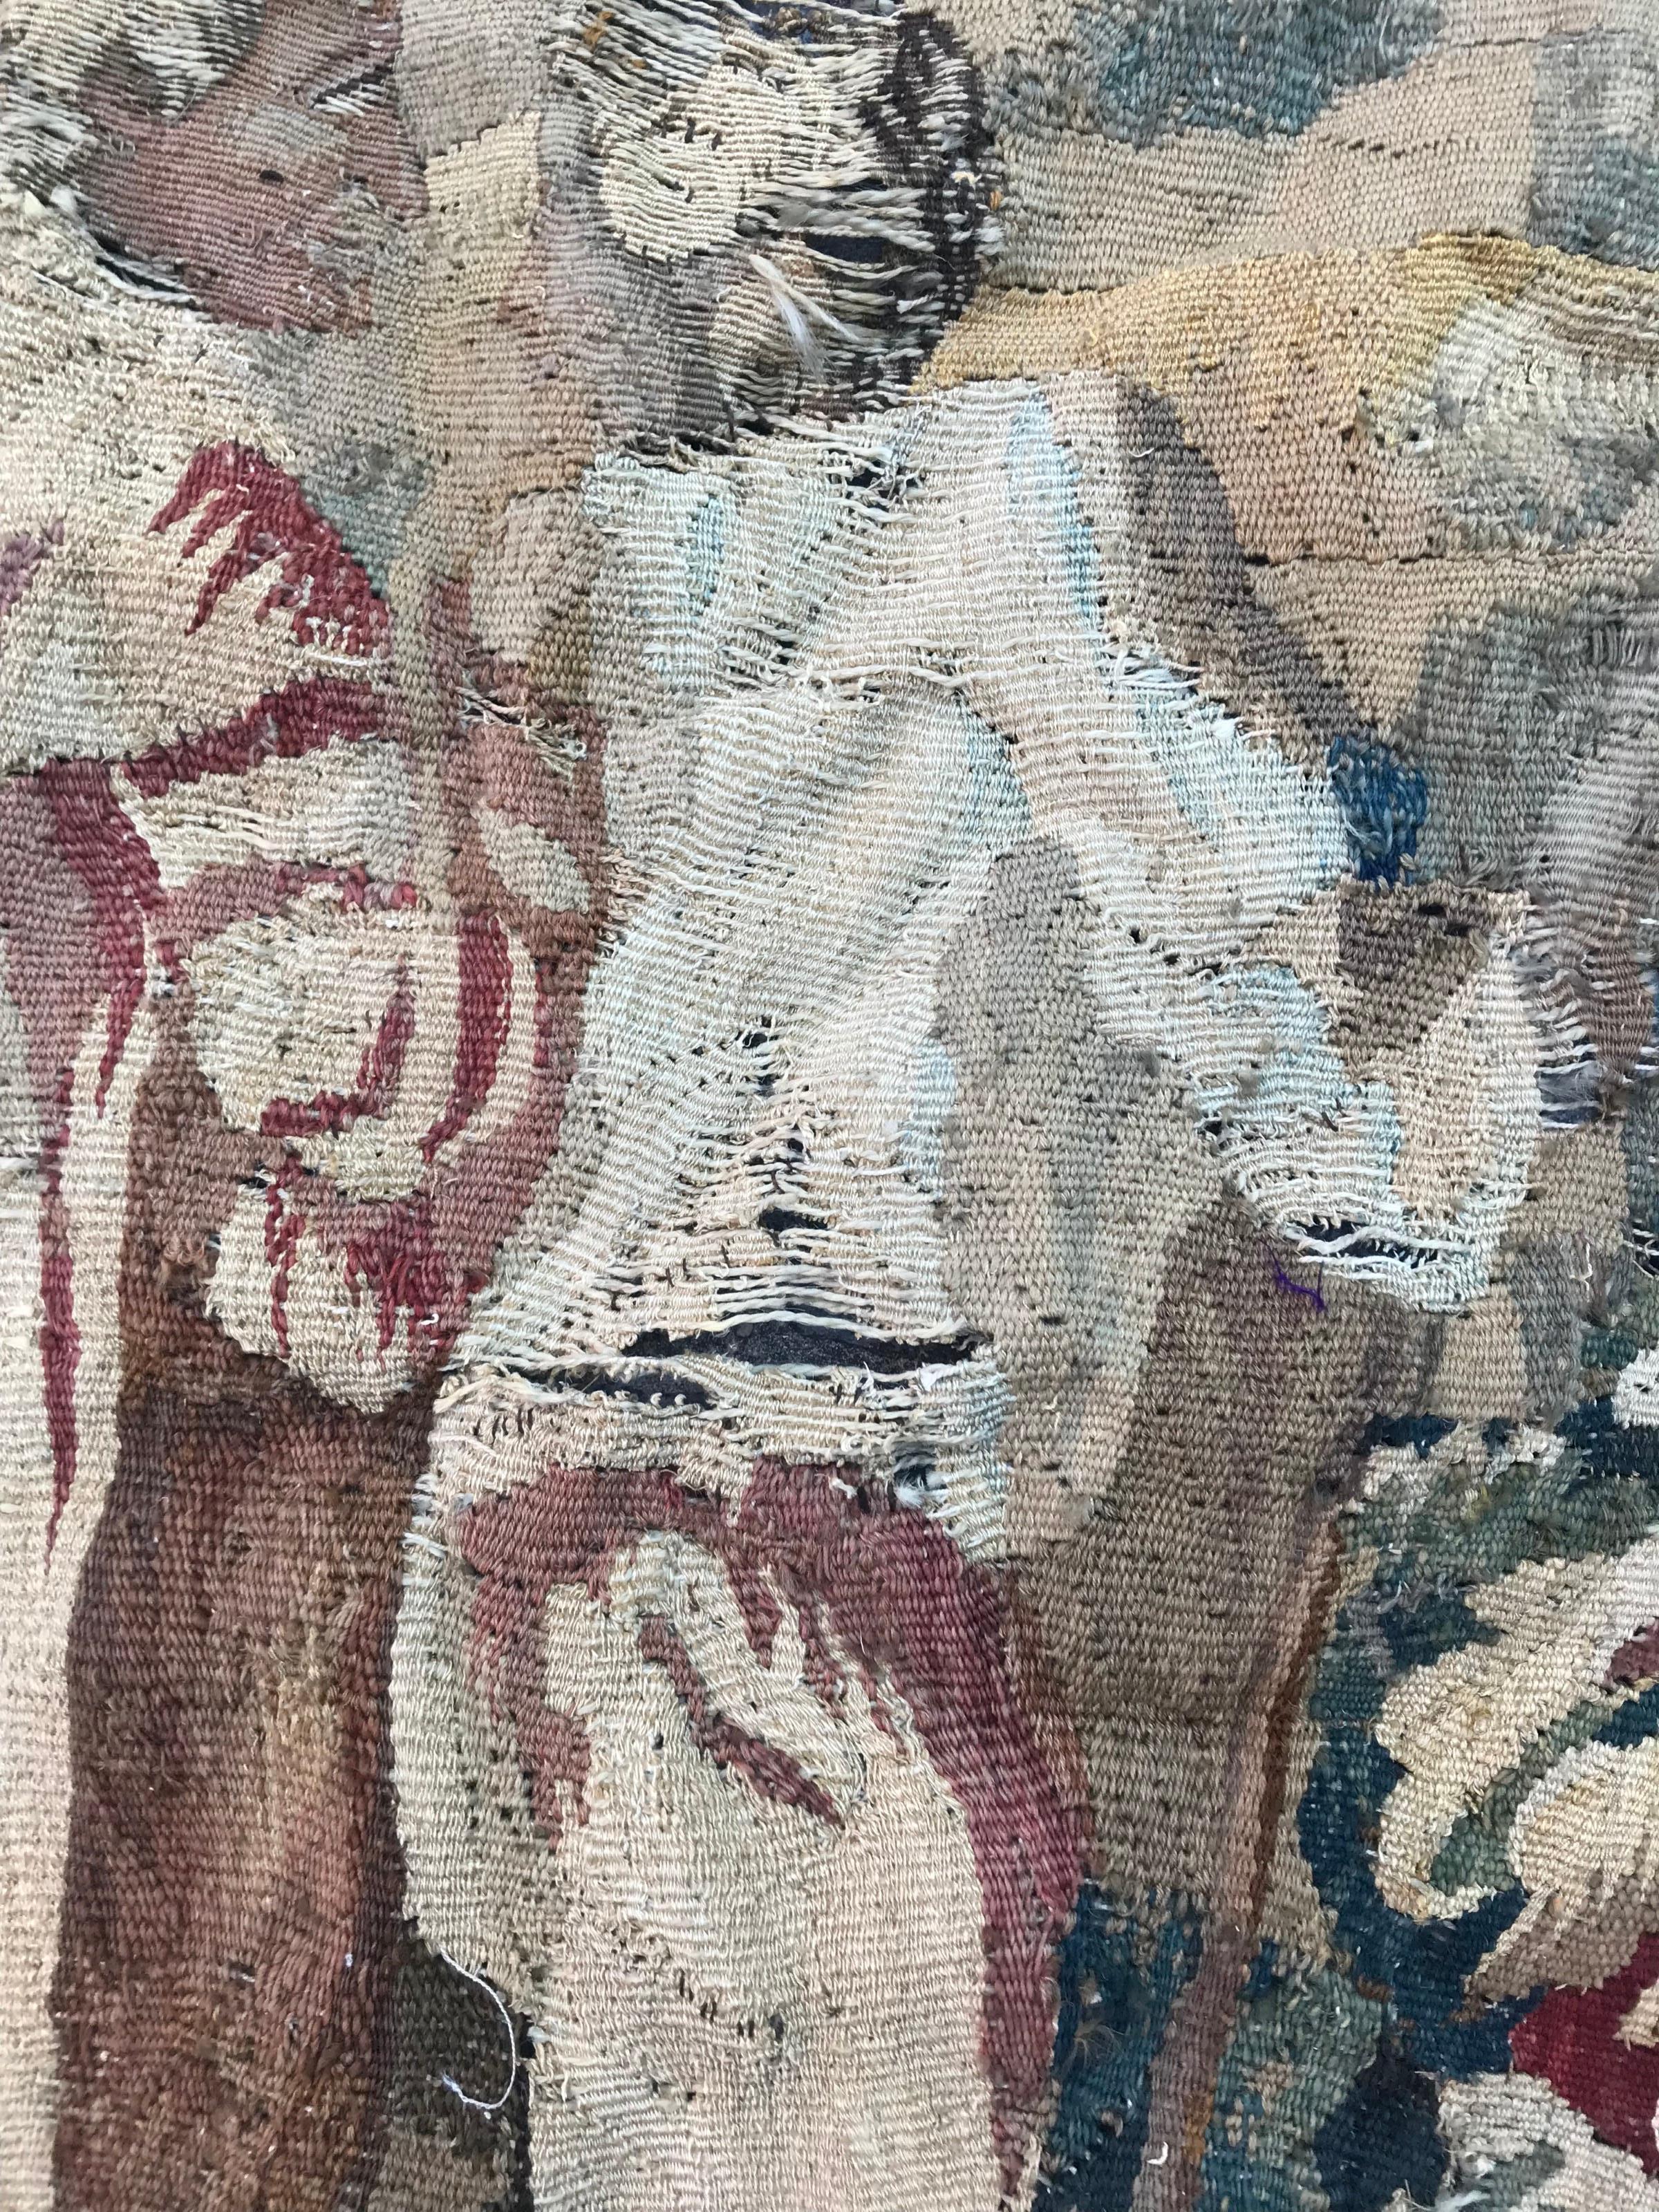 Silk Beautiful 18th Century Aubusson Tapestry Fragment For Sale